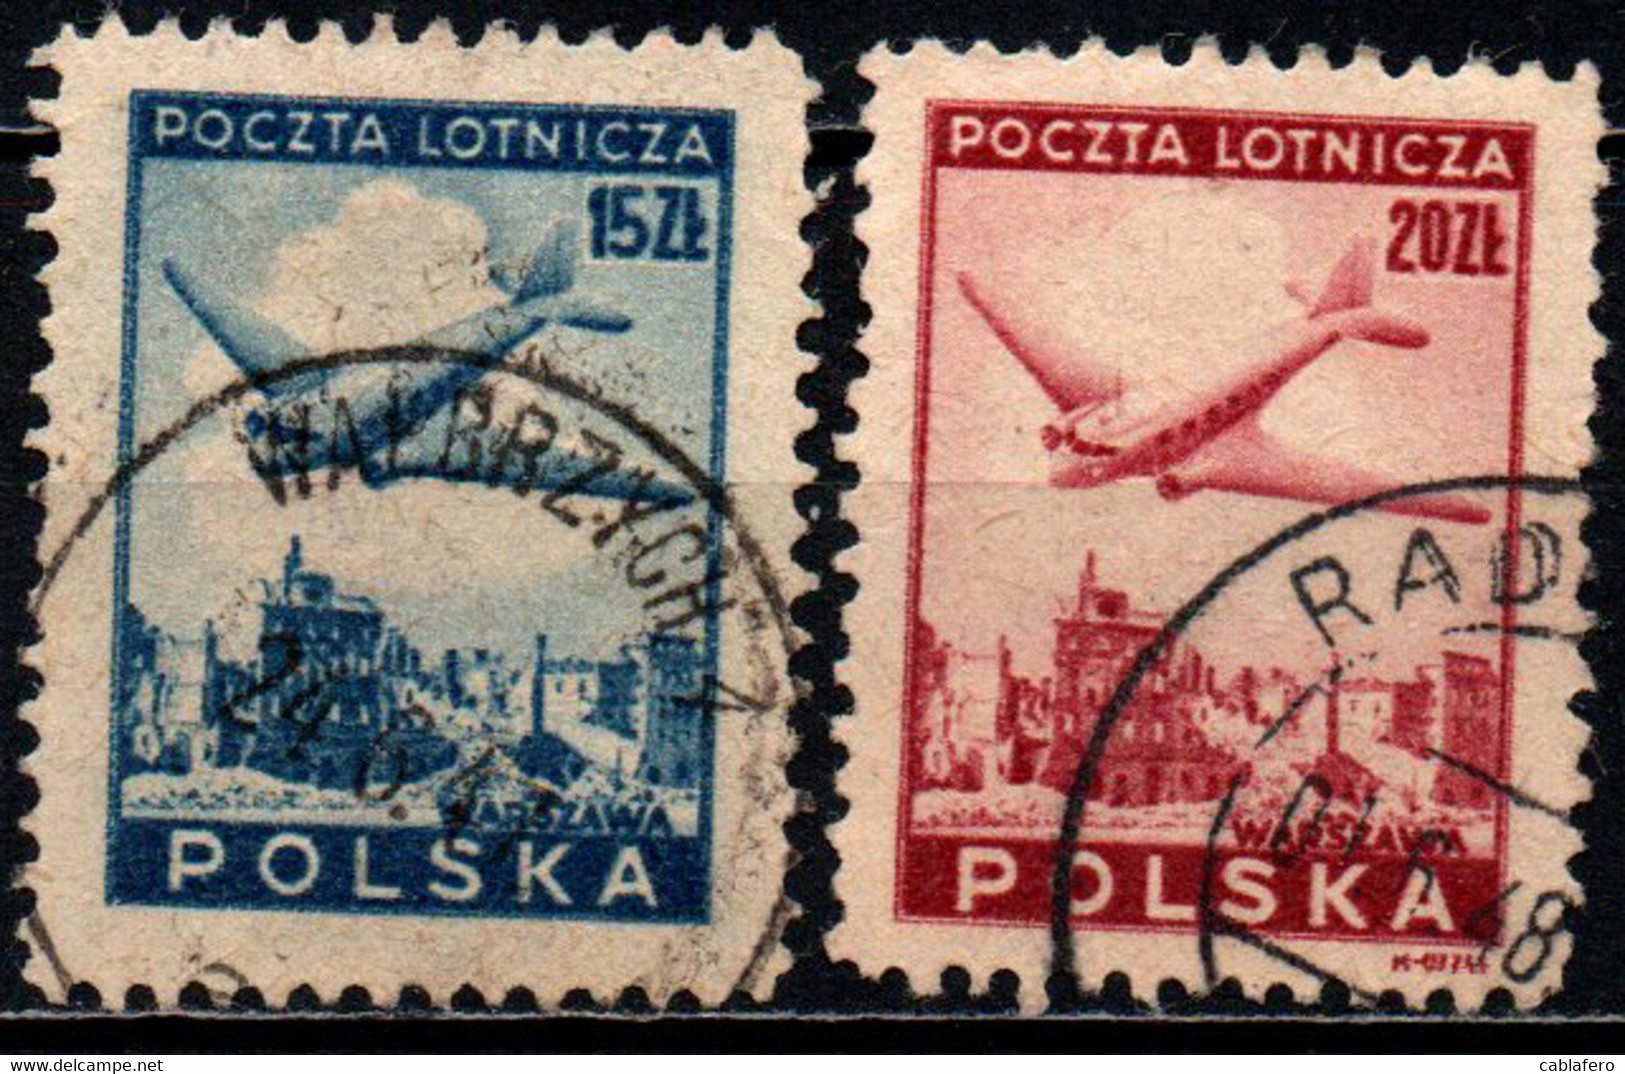 POLONIA - 1946 - Douglas Plane Over Ruins Of Warsaw - USATI - Used Stamps